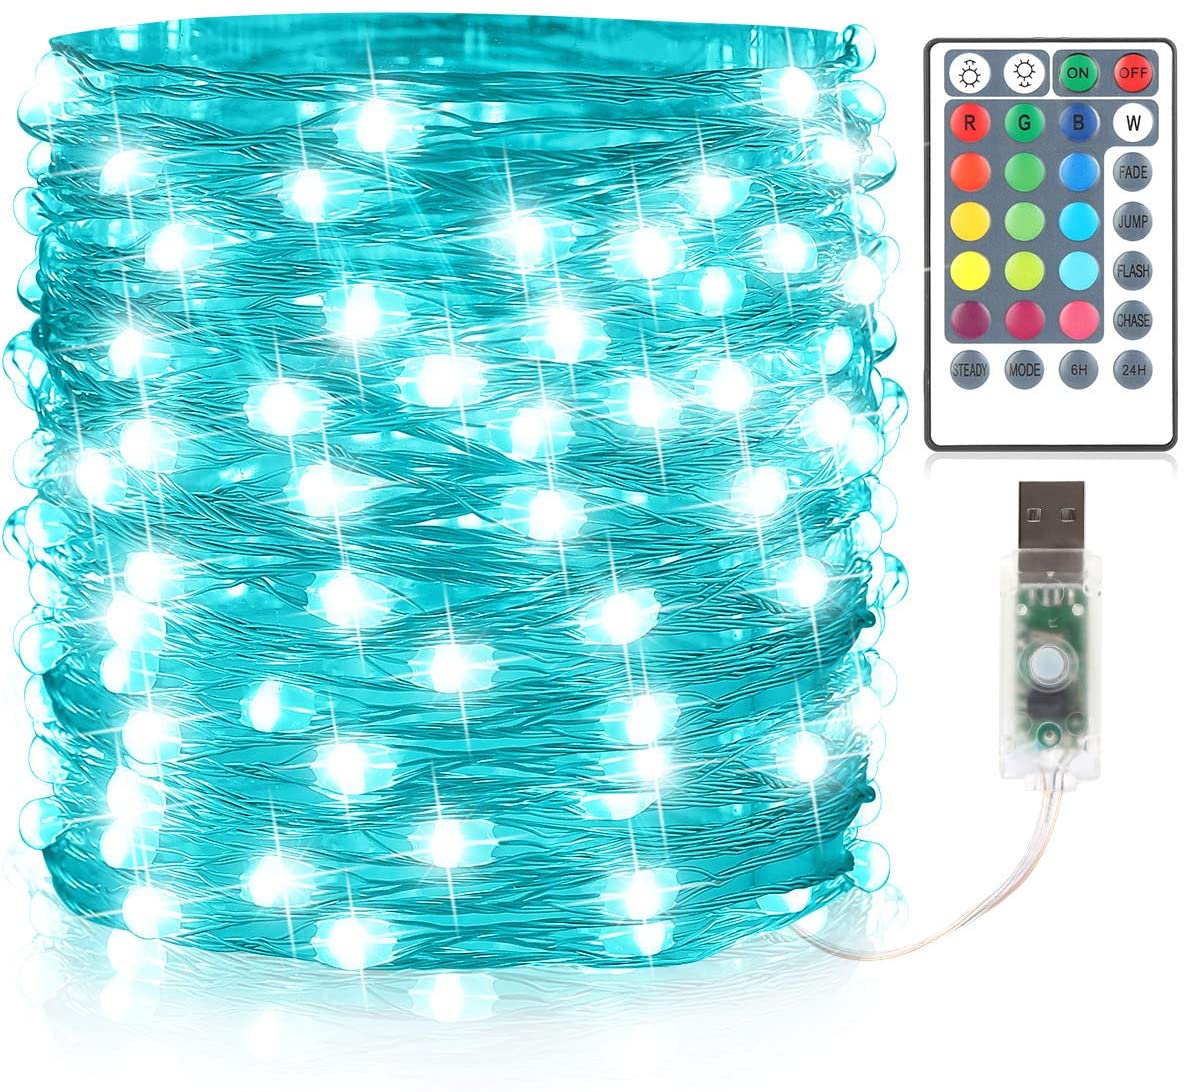 GDEALER 33Ft 100Led Fairy Lights 16 Colors 8 Modes USB Plug in String Lights Christmas Lights with Remote Multi Color Changing Twinkle Firefly Lights for Christmas Decor Bedroom Wedding Party